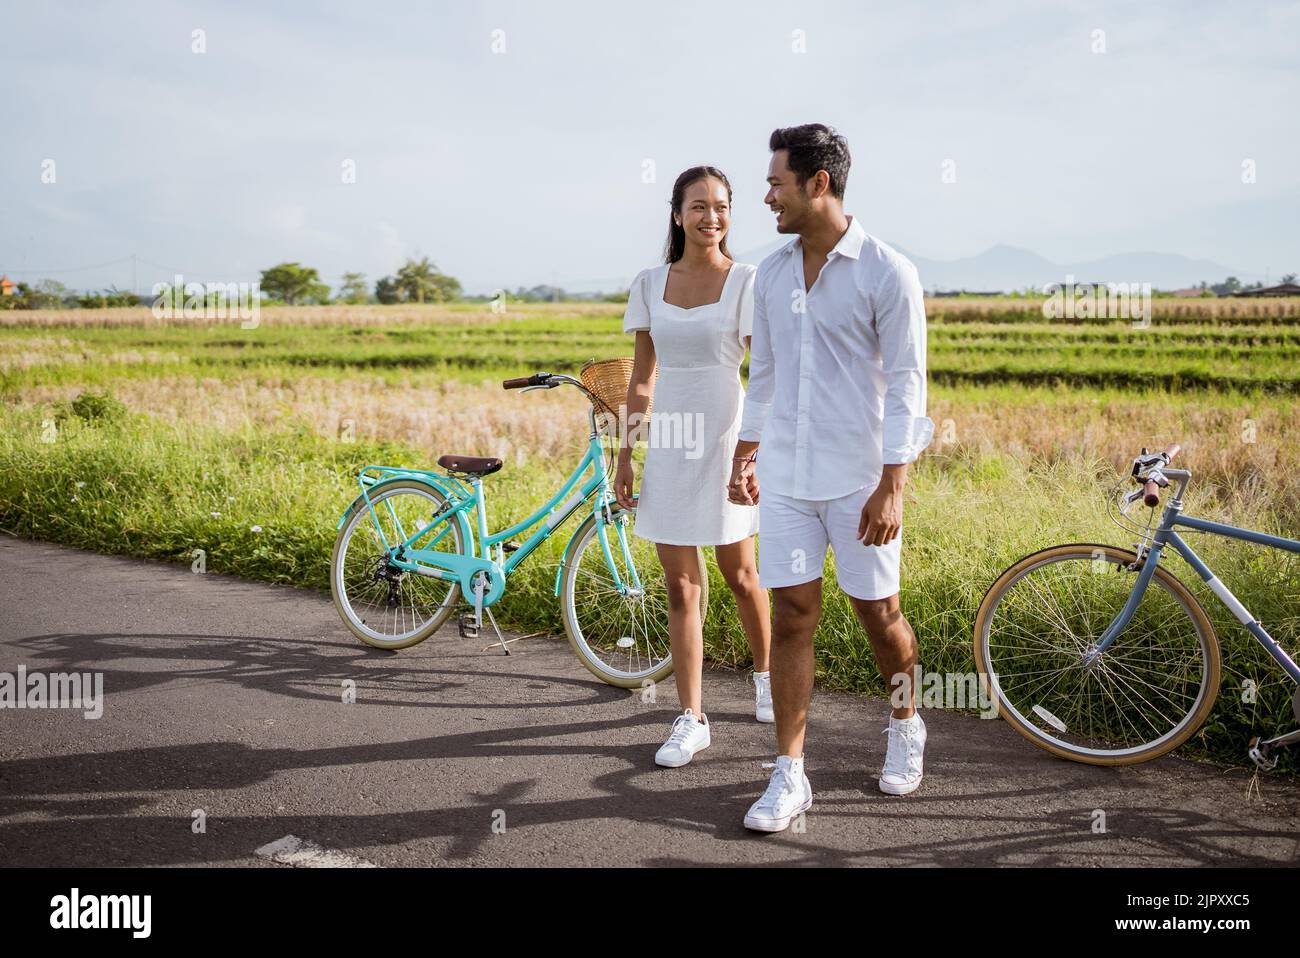 couple holding hand enjoy their time together outdoor Stock Photo